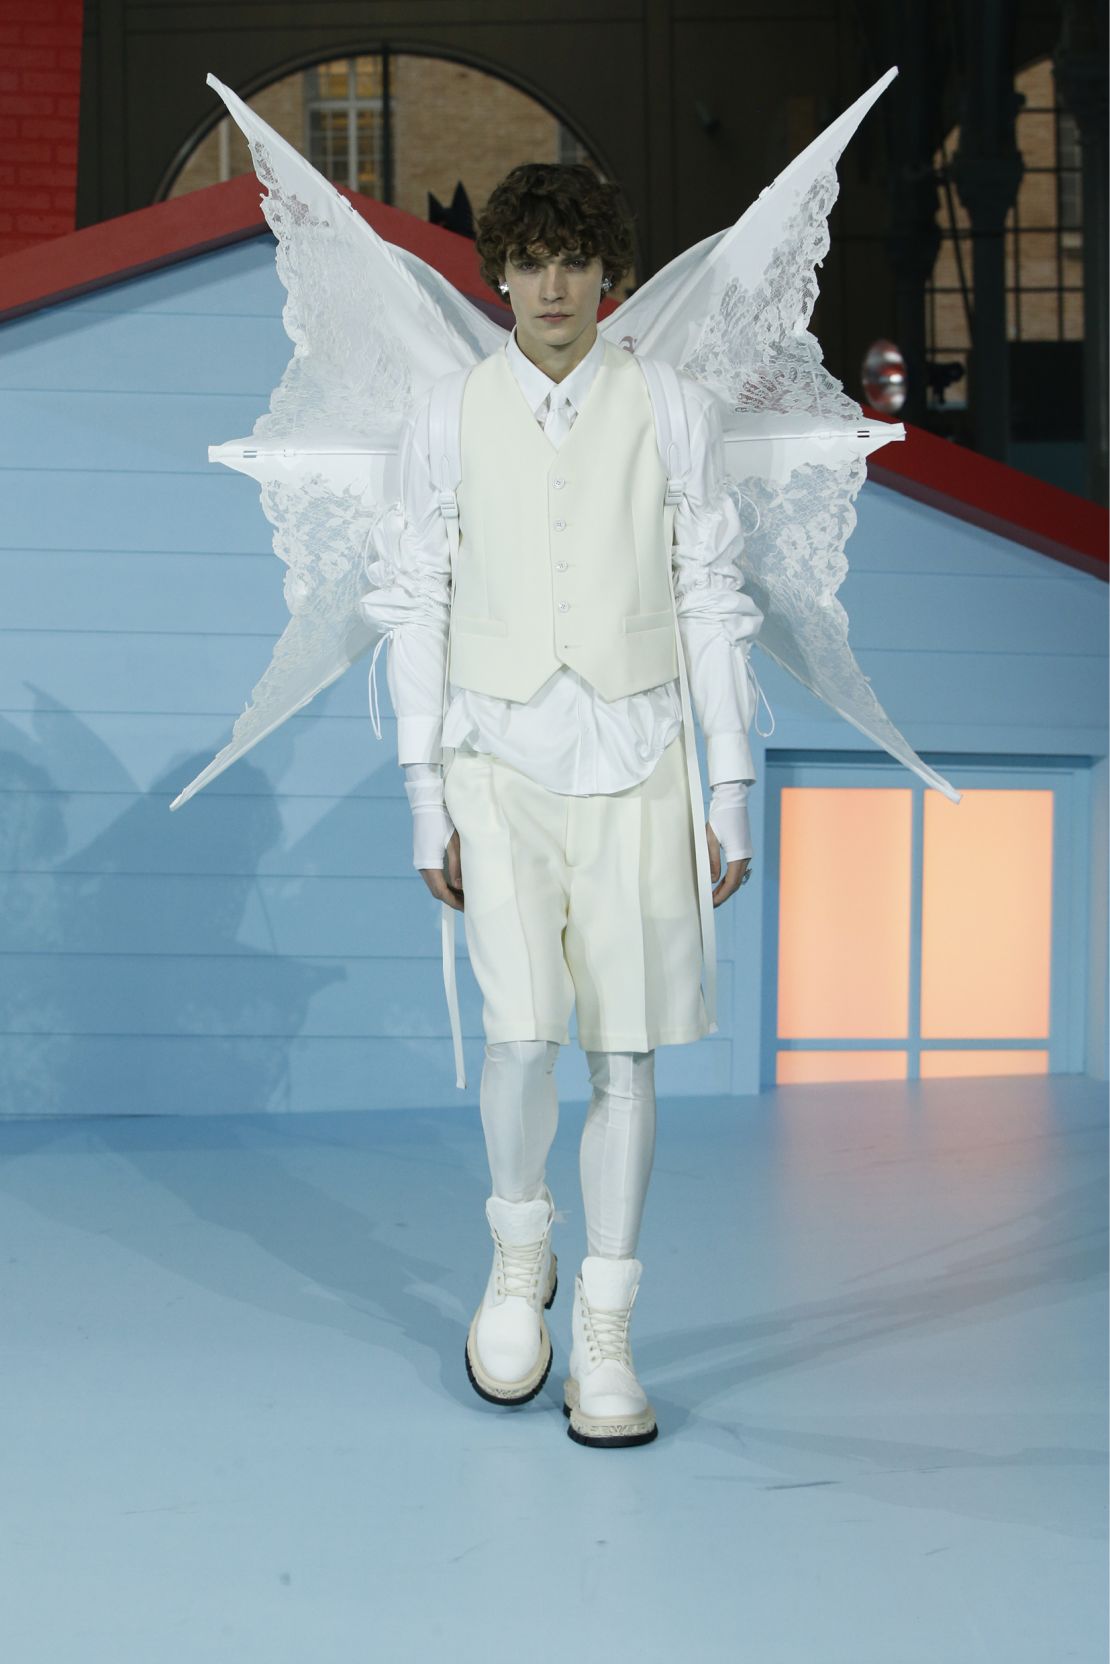 There was a moving ethereal quality to the presentation, lace kites fashioned into angelic wings.